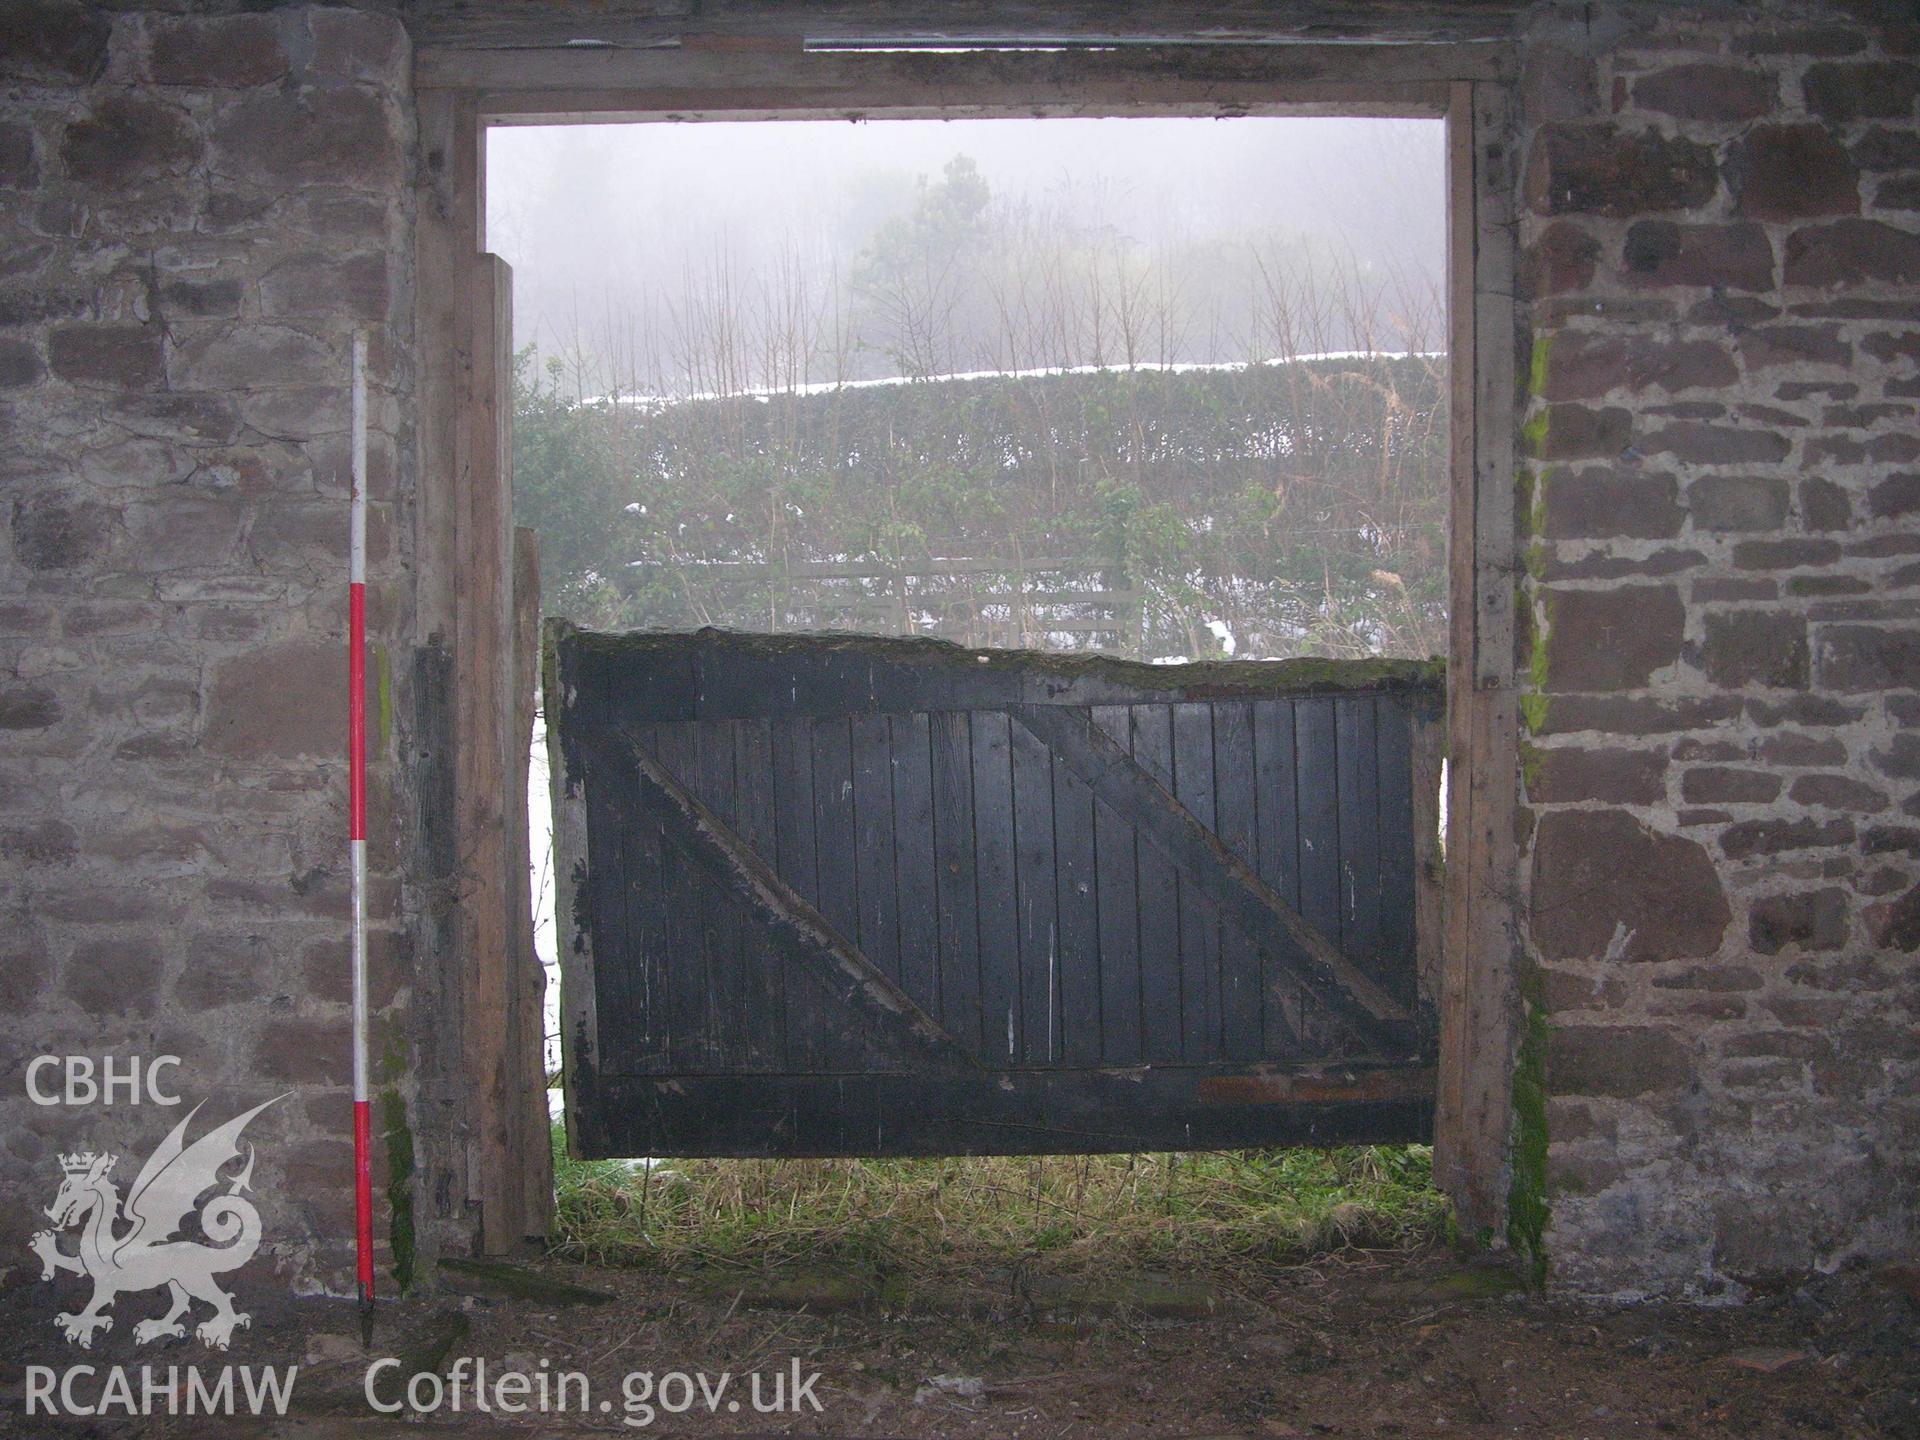 Digital photograph detailing a section of interior wall, from an Archaeological Building Recording of Hillside Barn, Llanvaches, Monmouthshire, which was conducted by Cambrian Archaeological Projects.